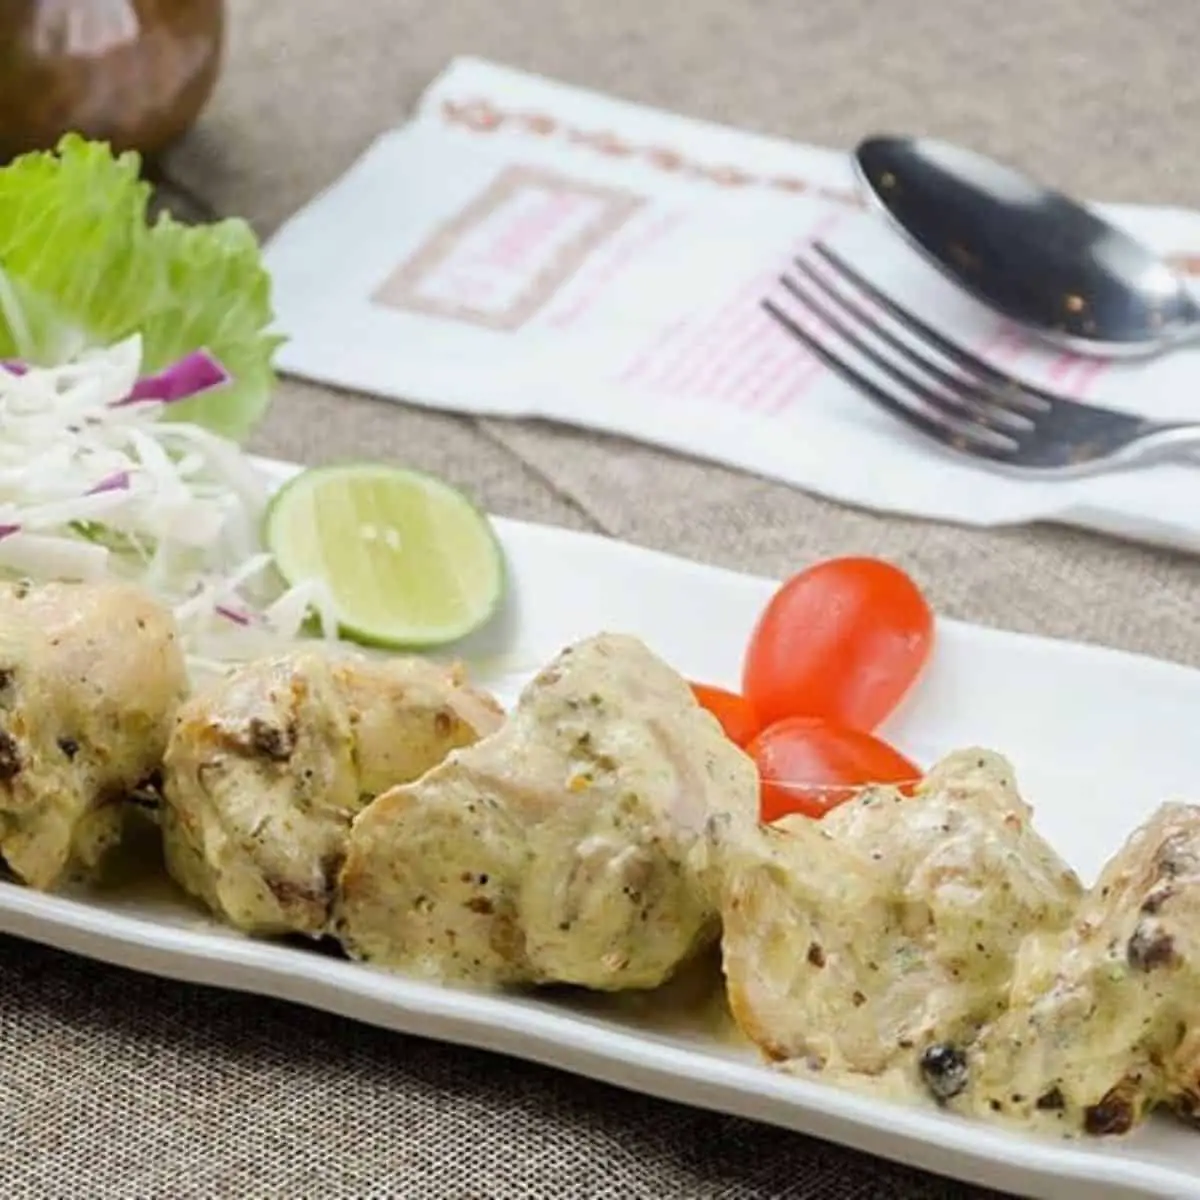 Creamy Indian dish with mixed veggies on a rectangular plate from d Tandoor Restaurant Penang